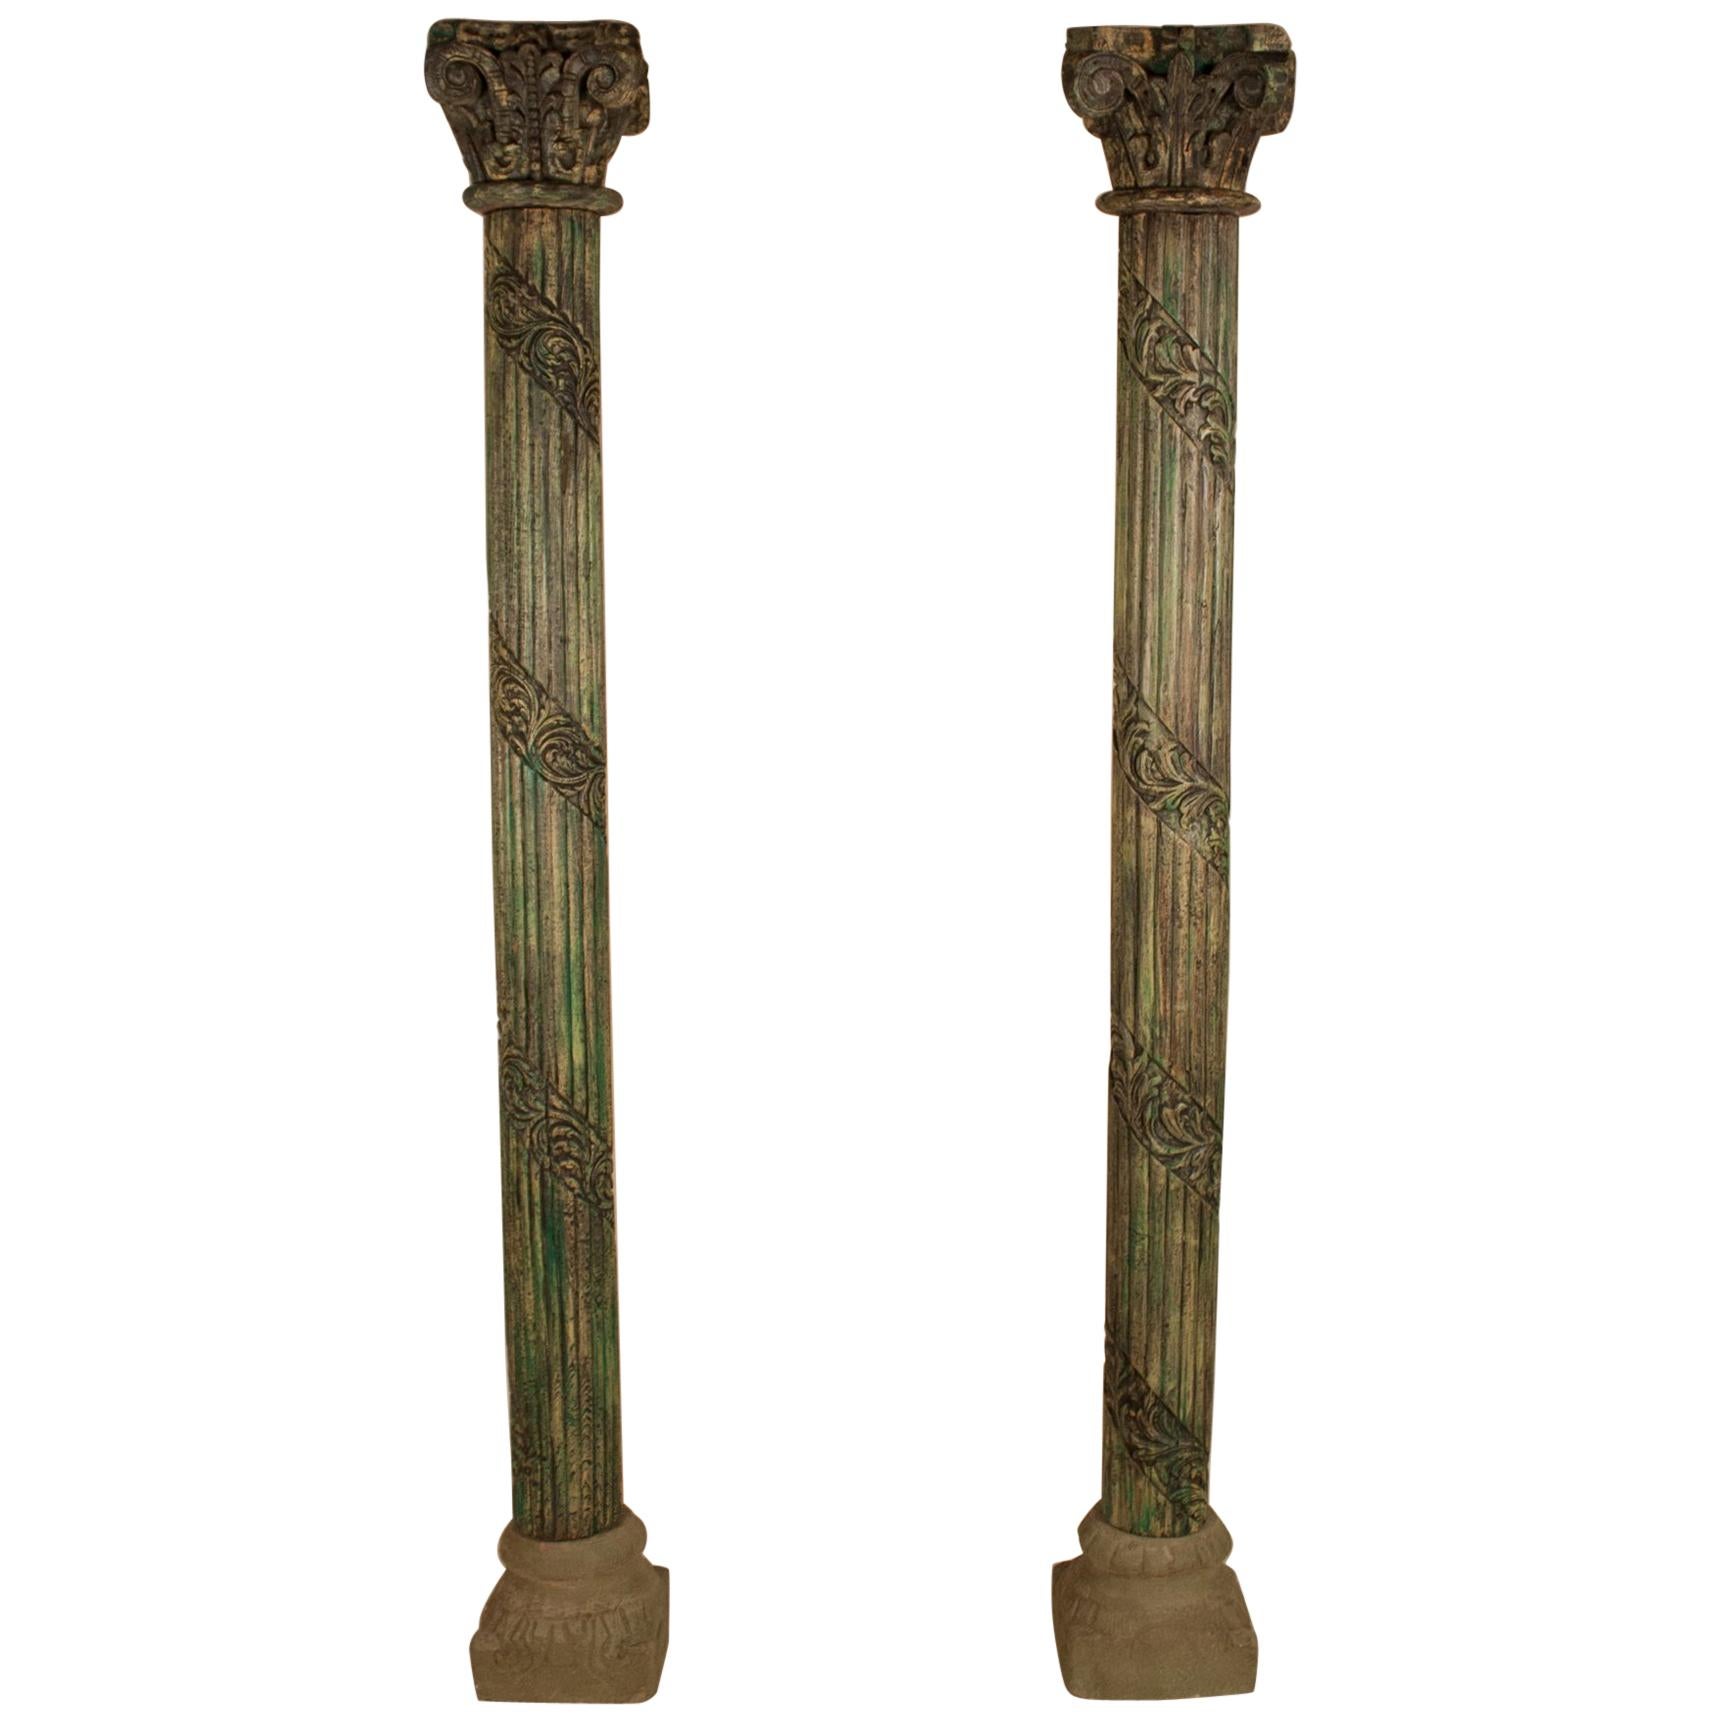 Pair of Carved, Painted Wood Columns from India